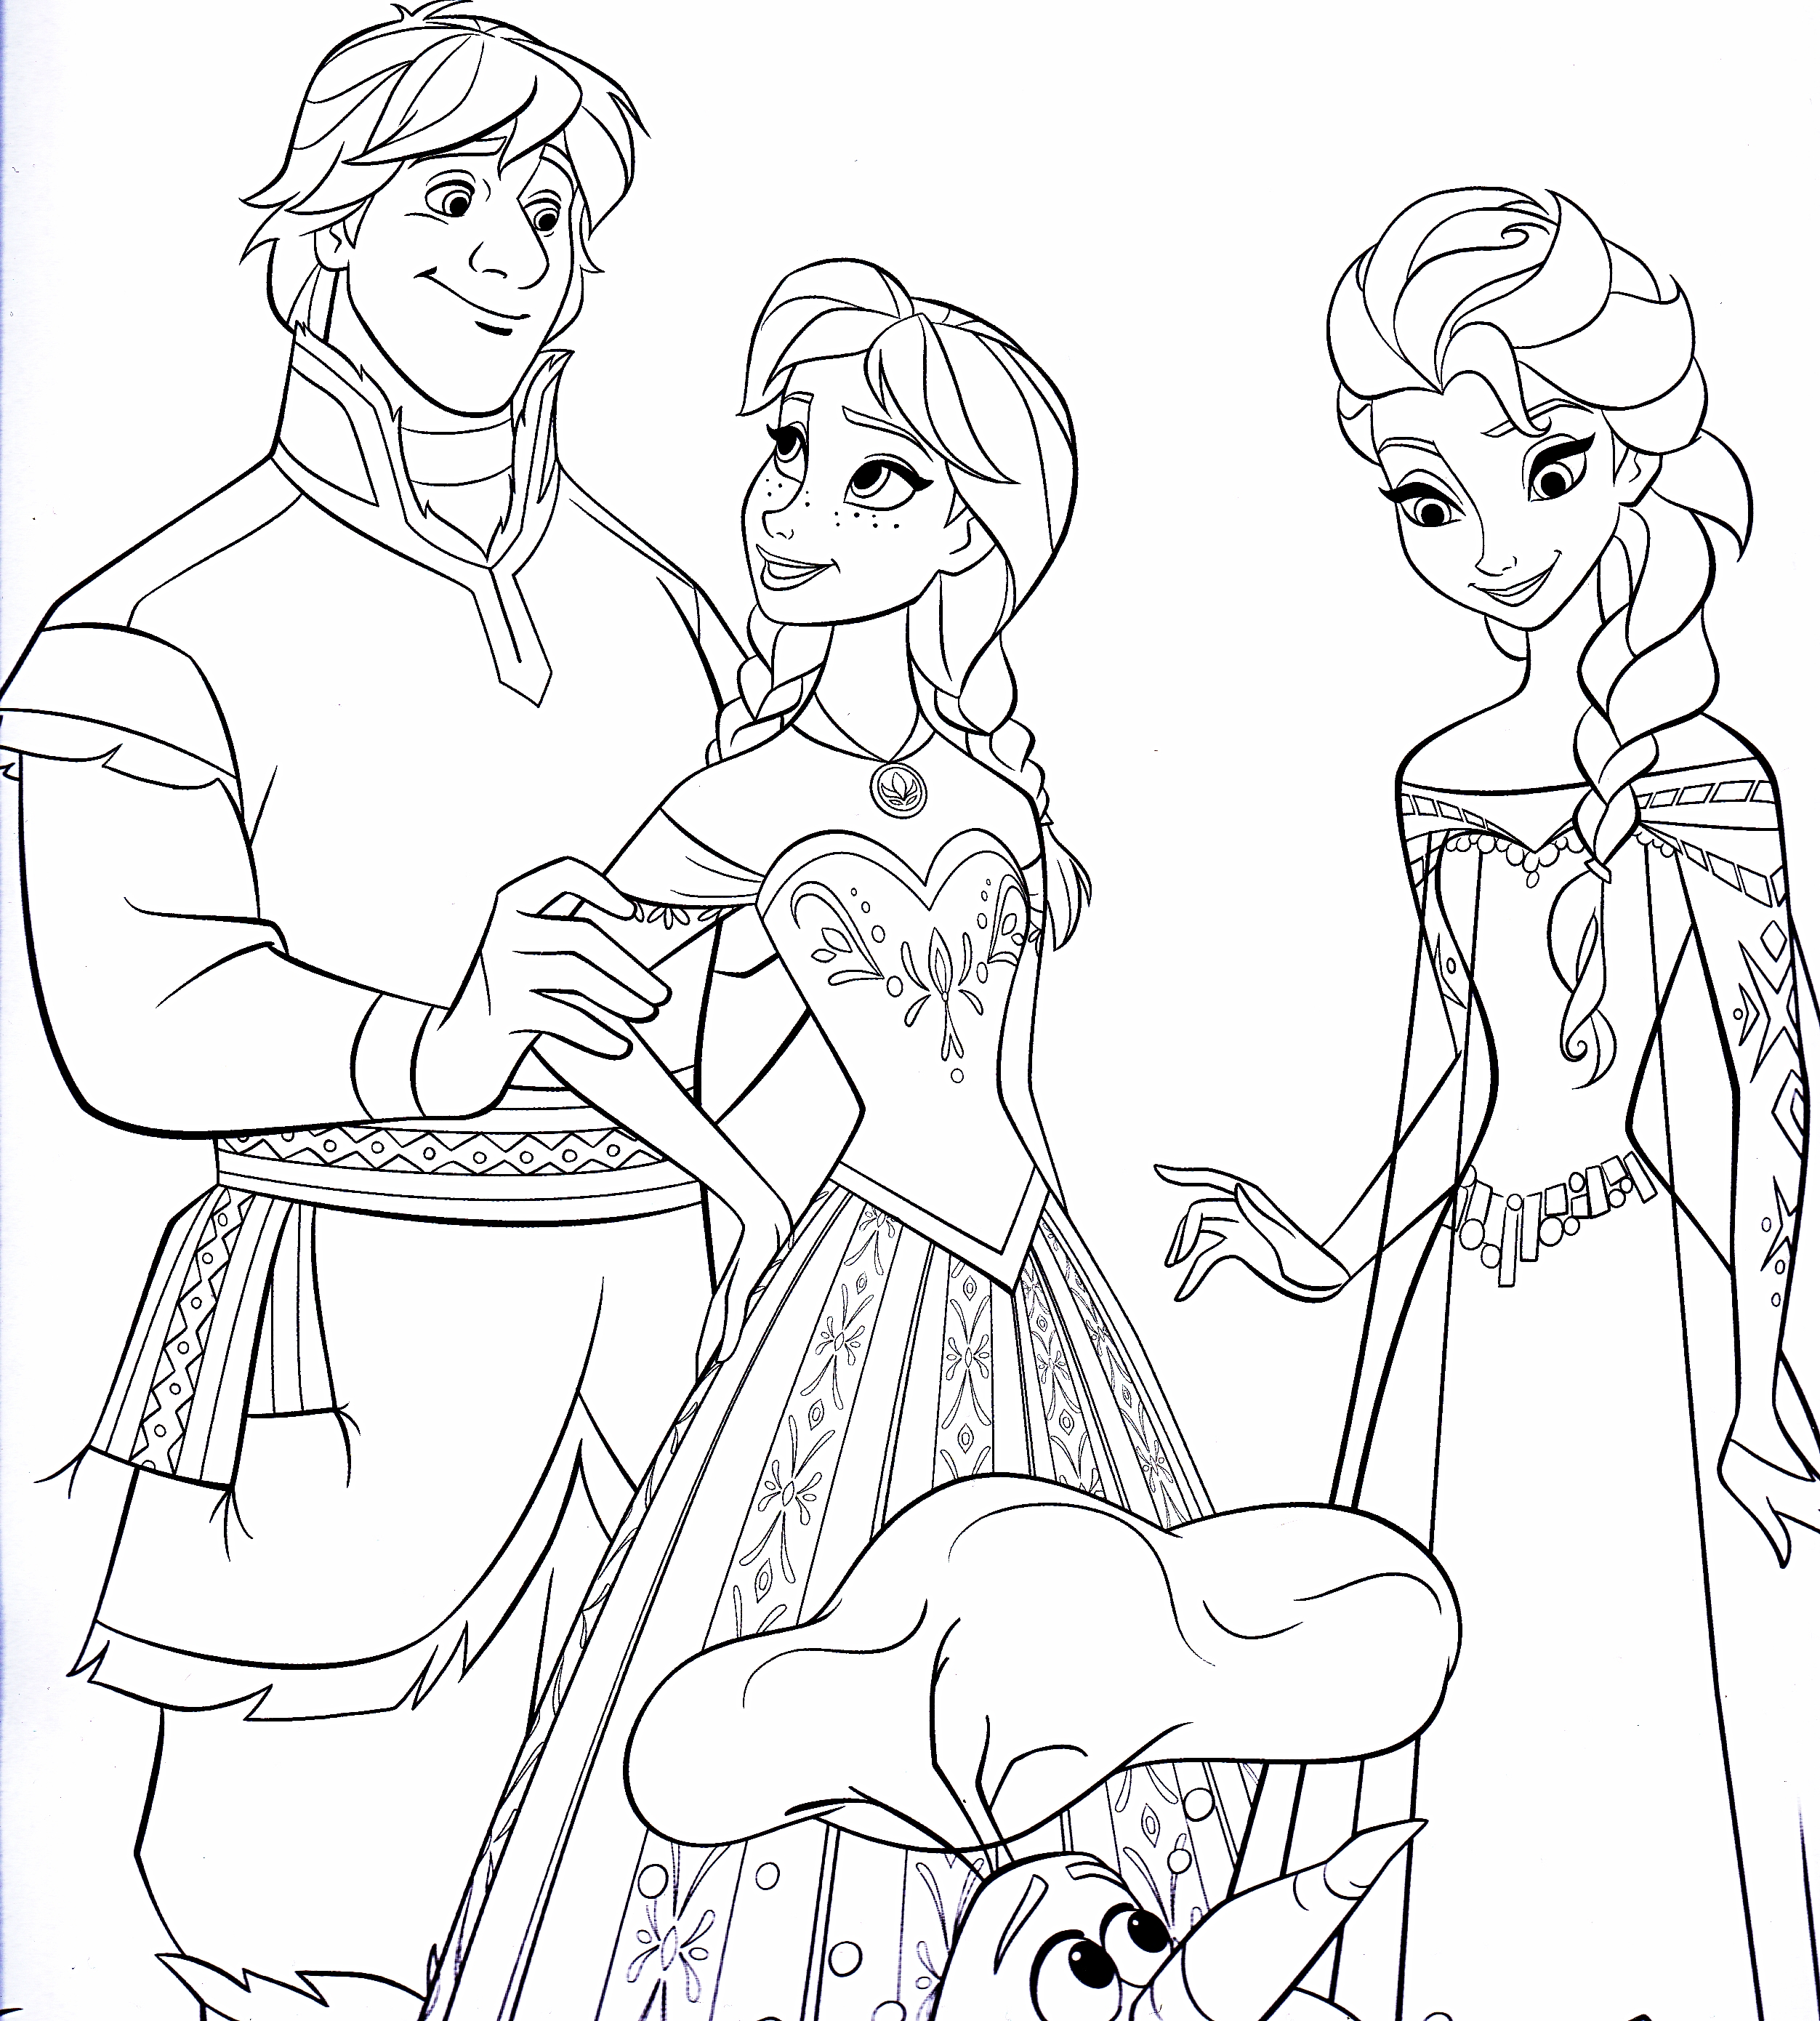  Disney  s Frozen Colouring  Pages  Cute  Kawaii  Resources